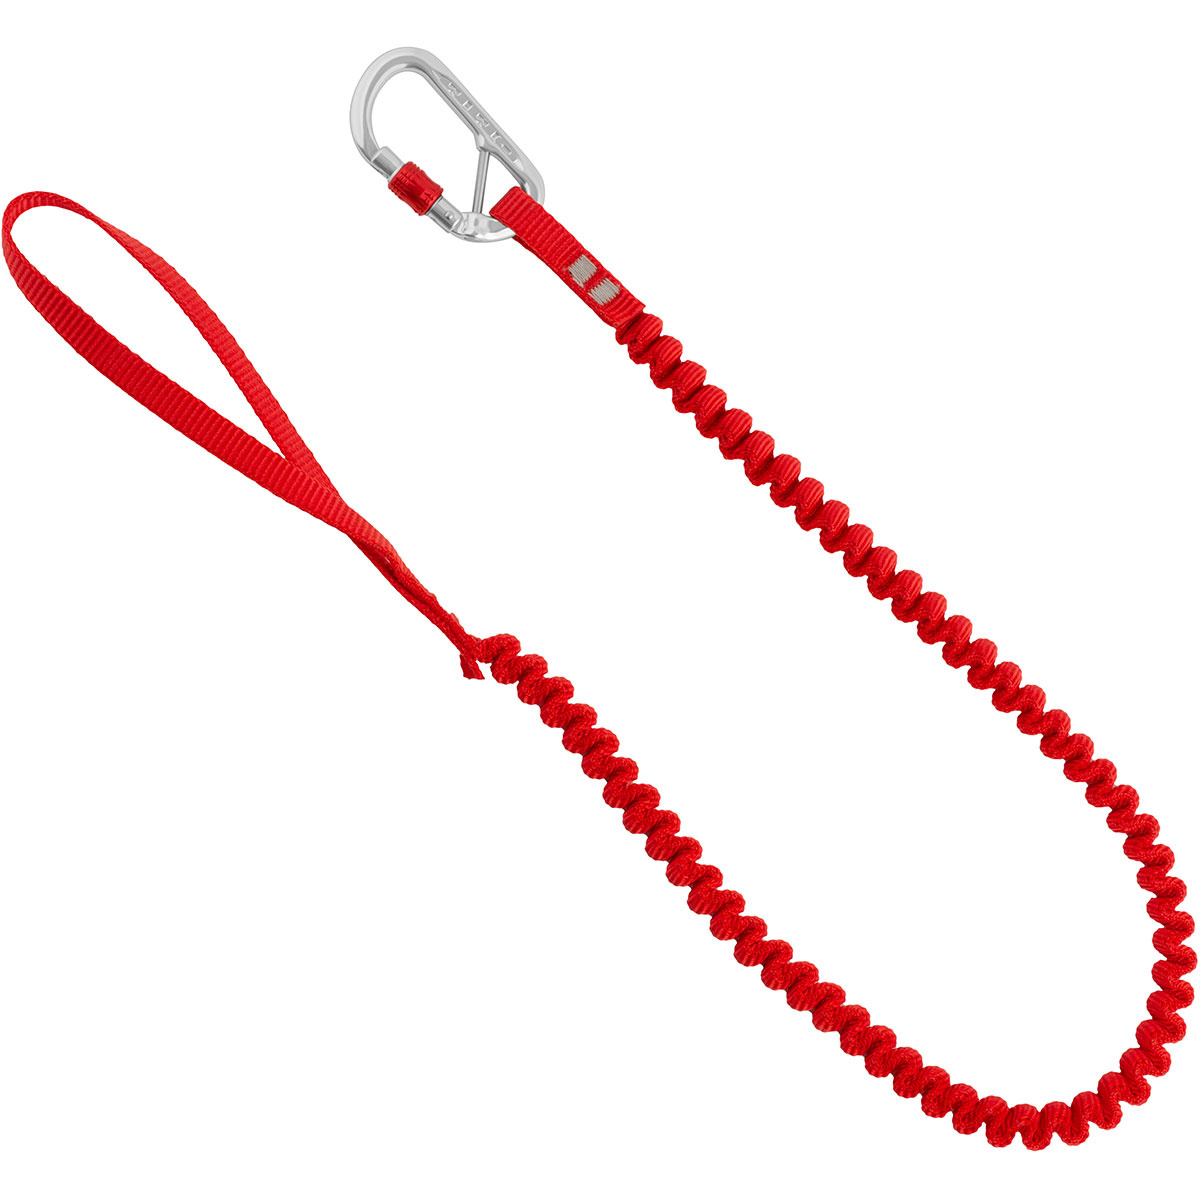 Image of DMM Leash Freedom Single XSRE